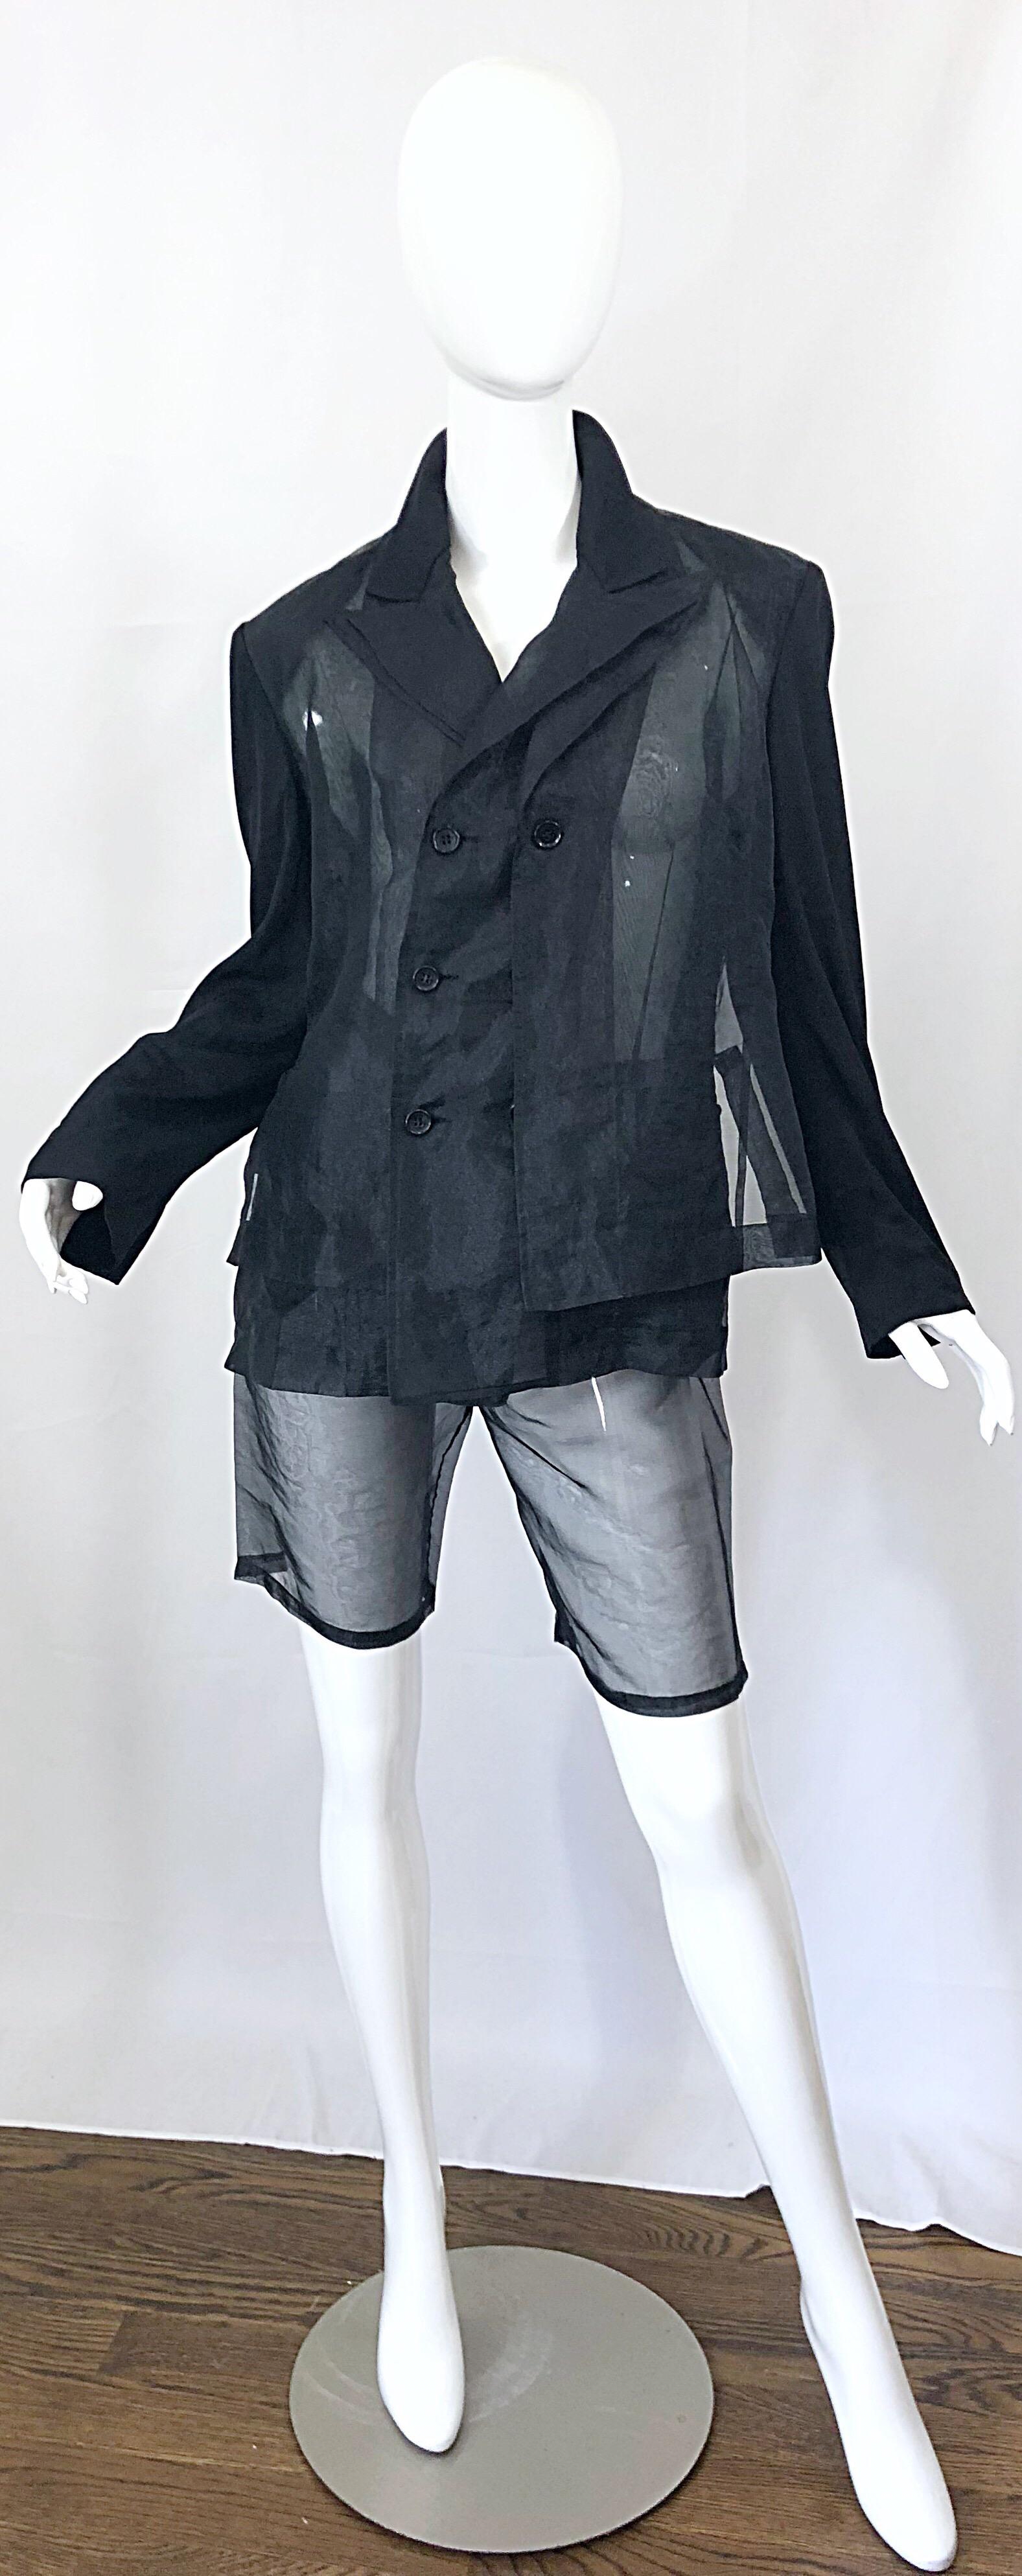 Amazing musuem quality 1990s COMME DES GARCONS black sheer slouchy double breasted blazer jacket and shorts suit! So much detail to this rare ensemble. Double layered black sheer organza panels on the jacket with a solid back. POCKETS at each side